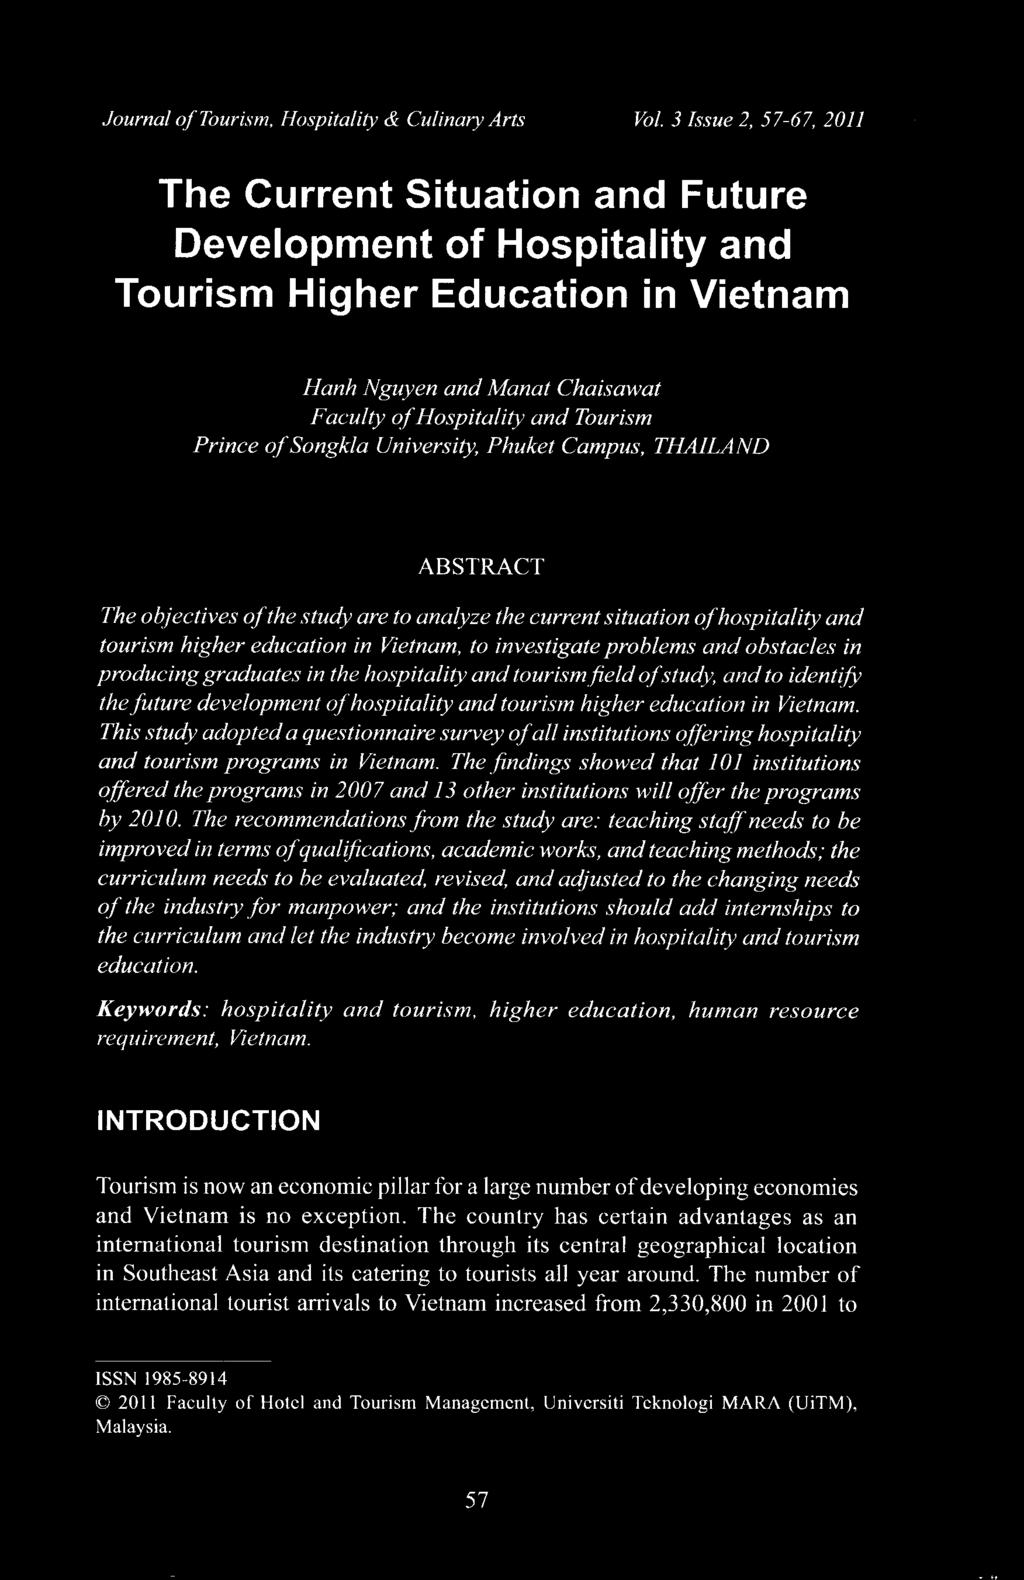 Songkla University, Phuket Campus, THAILAND ABSTRACT The objectives of the study are to analyze the current situation of hospitality and tourism higher education in Vietnam, to investigate problems